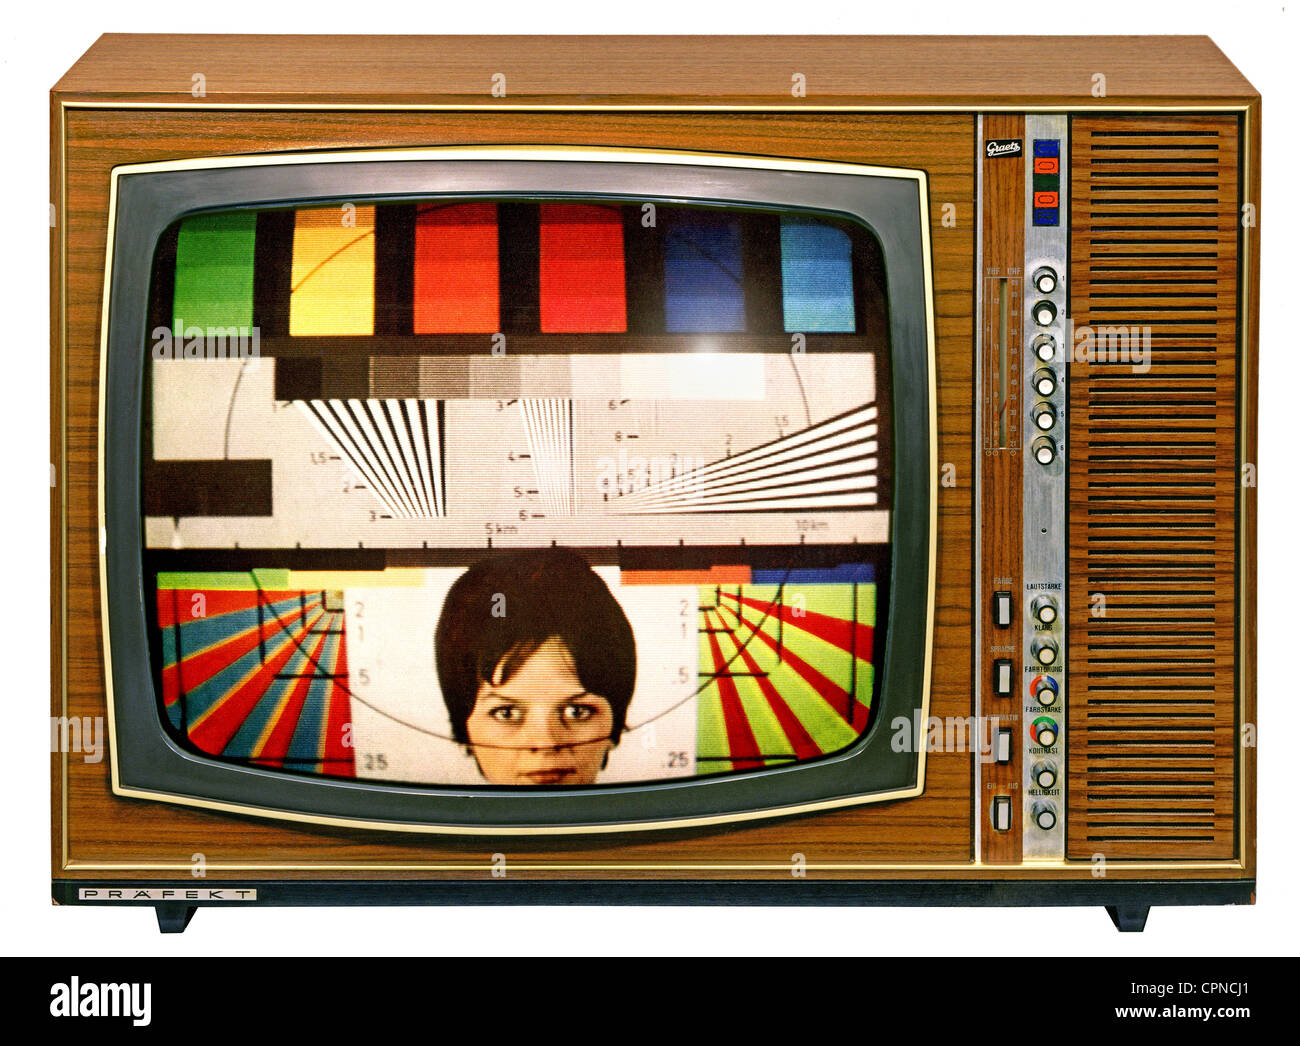 broadcast,television,television set,Graetz Praefekt Color,with TV test pattern from 1967,screen size: 55 centimeter diagonal,assembled with 13 tubes,44 transistors,chassis: exotic woods,walnut tree high-gloss polished,former original price: 2060 DM,Germany,1968,colour test screen,colour TV test screen,colour television test screen,screens,telescreen,TV screen,test screen,tabletop unit,tabletop device,early,German,Germans,colour TV set,color TV set,color television,colour television,TV device,colour,color,television set,TV set,T,Additional-Rights-Clearences-Not Available Stock Photo